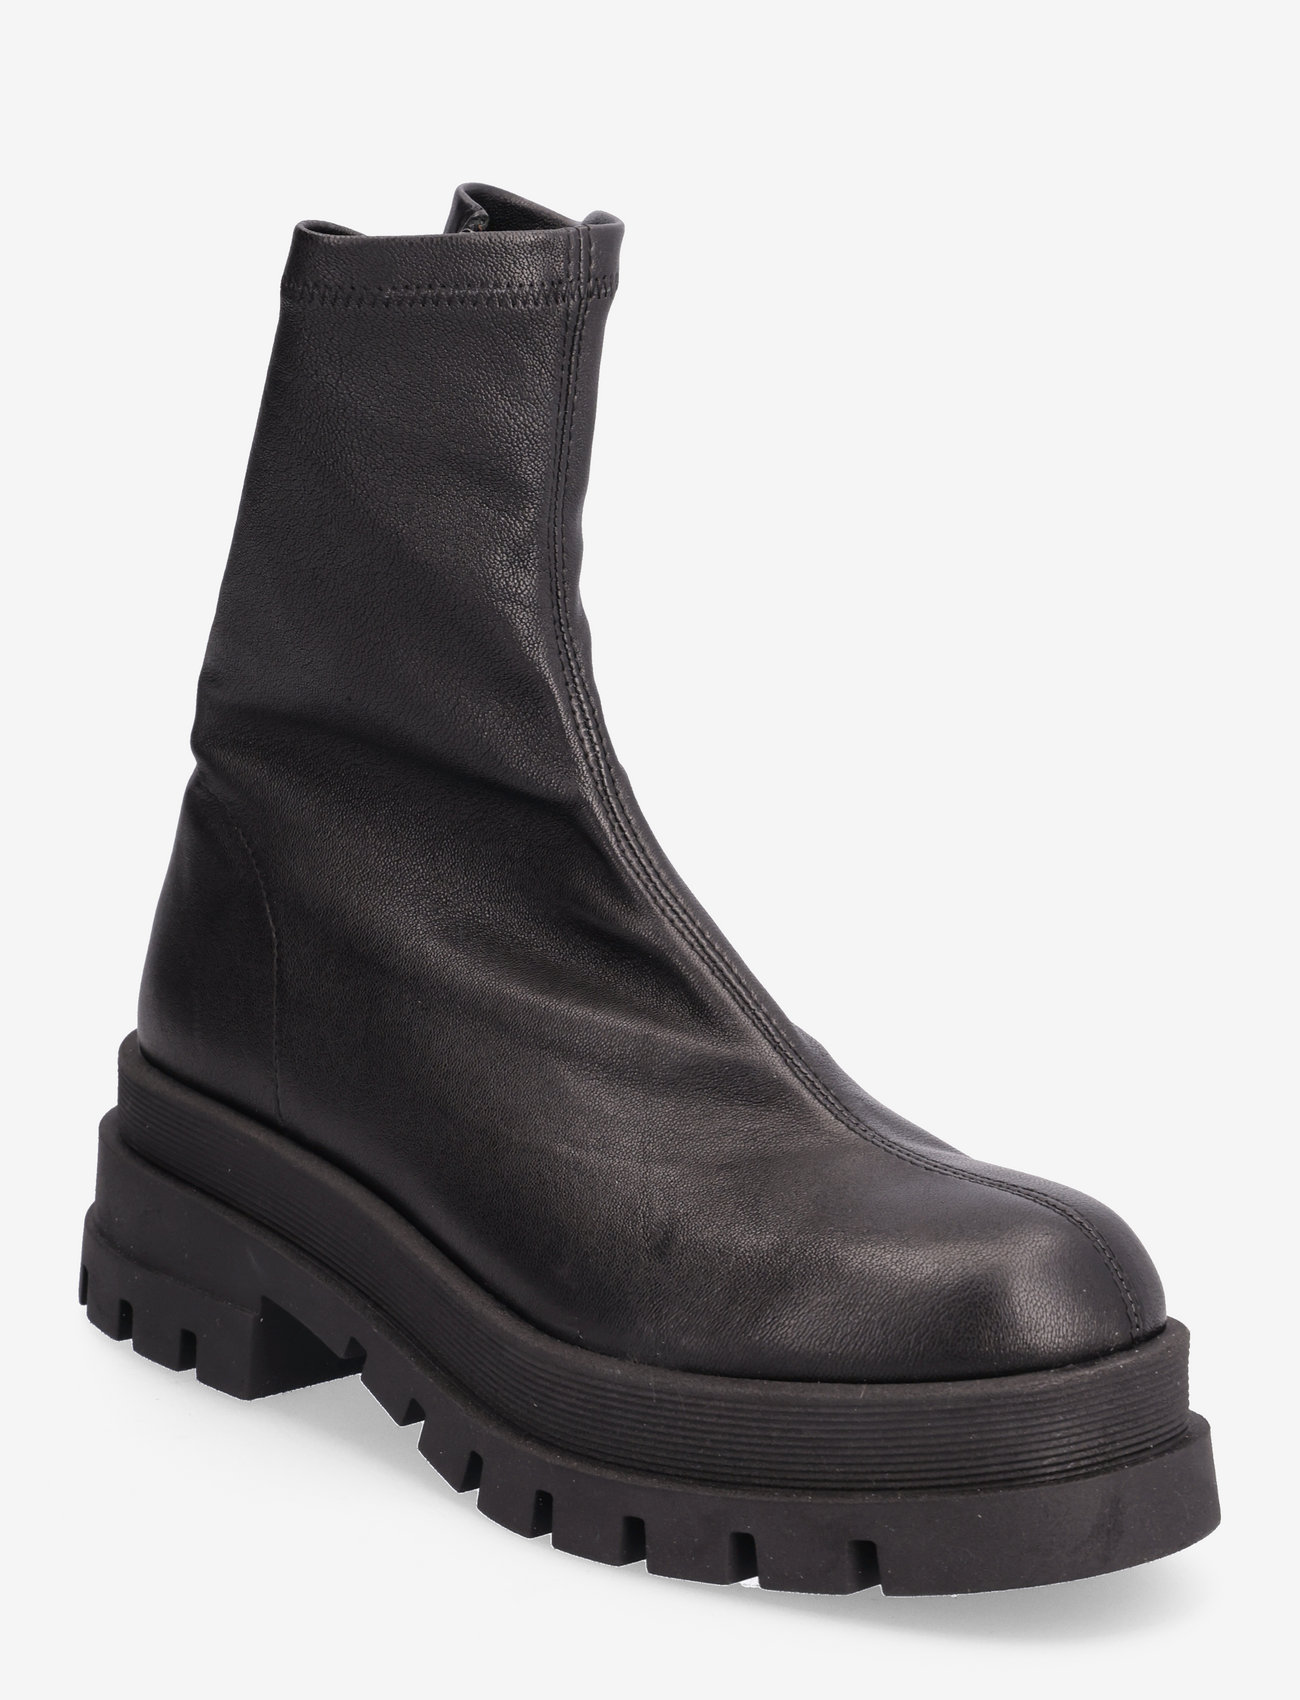 NEWD.Tamaris - Woms Boots - flat ankle boots - black - 0